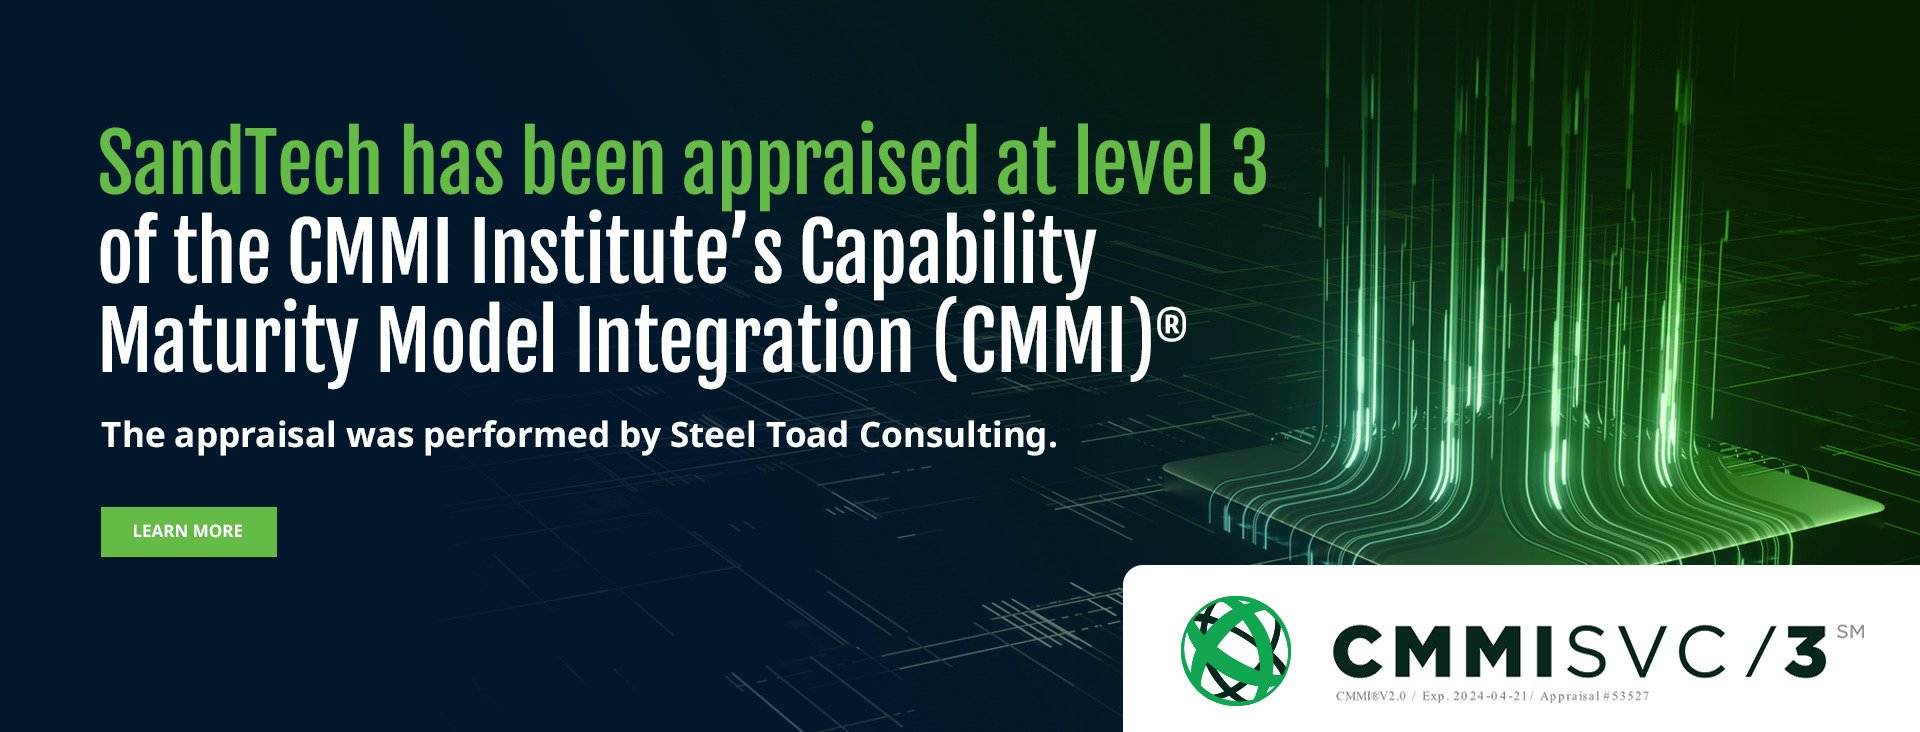 SandTech has been appraised at level 3 of the CMMI Institute's Capability Maturity Model Integration (CMMI)